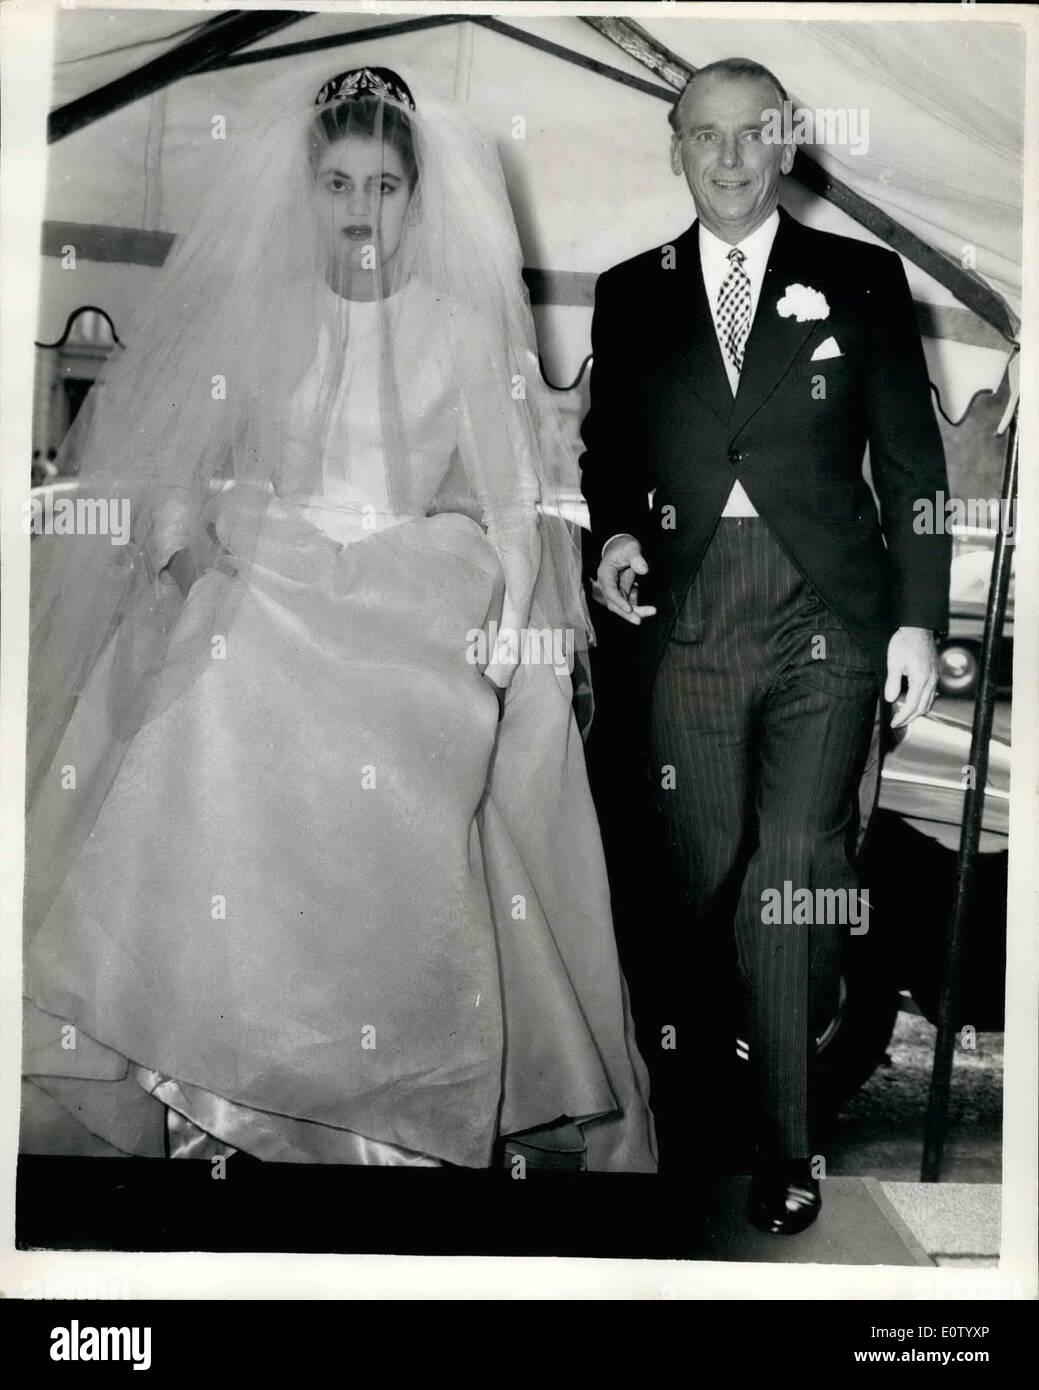 Oct. 10, 1960 - Daughter Of Douglas Fairbanks Weds: The wedding took place this afternoon at the Guards Chapel of Miss Daphne Fairbanks - 20 year old daughter of Mr. and Mrs. Douglas Fairbanks - old son of a London Shipowner. Phot Shows Douglas Fairbanks and his daughter - the bride - arriving for the wedding this afternoon. Stock Photo